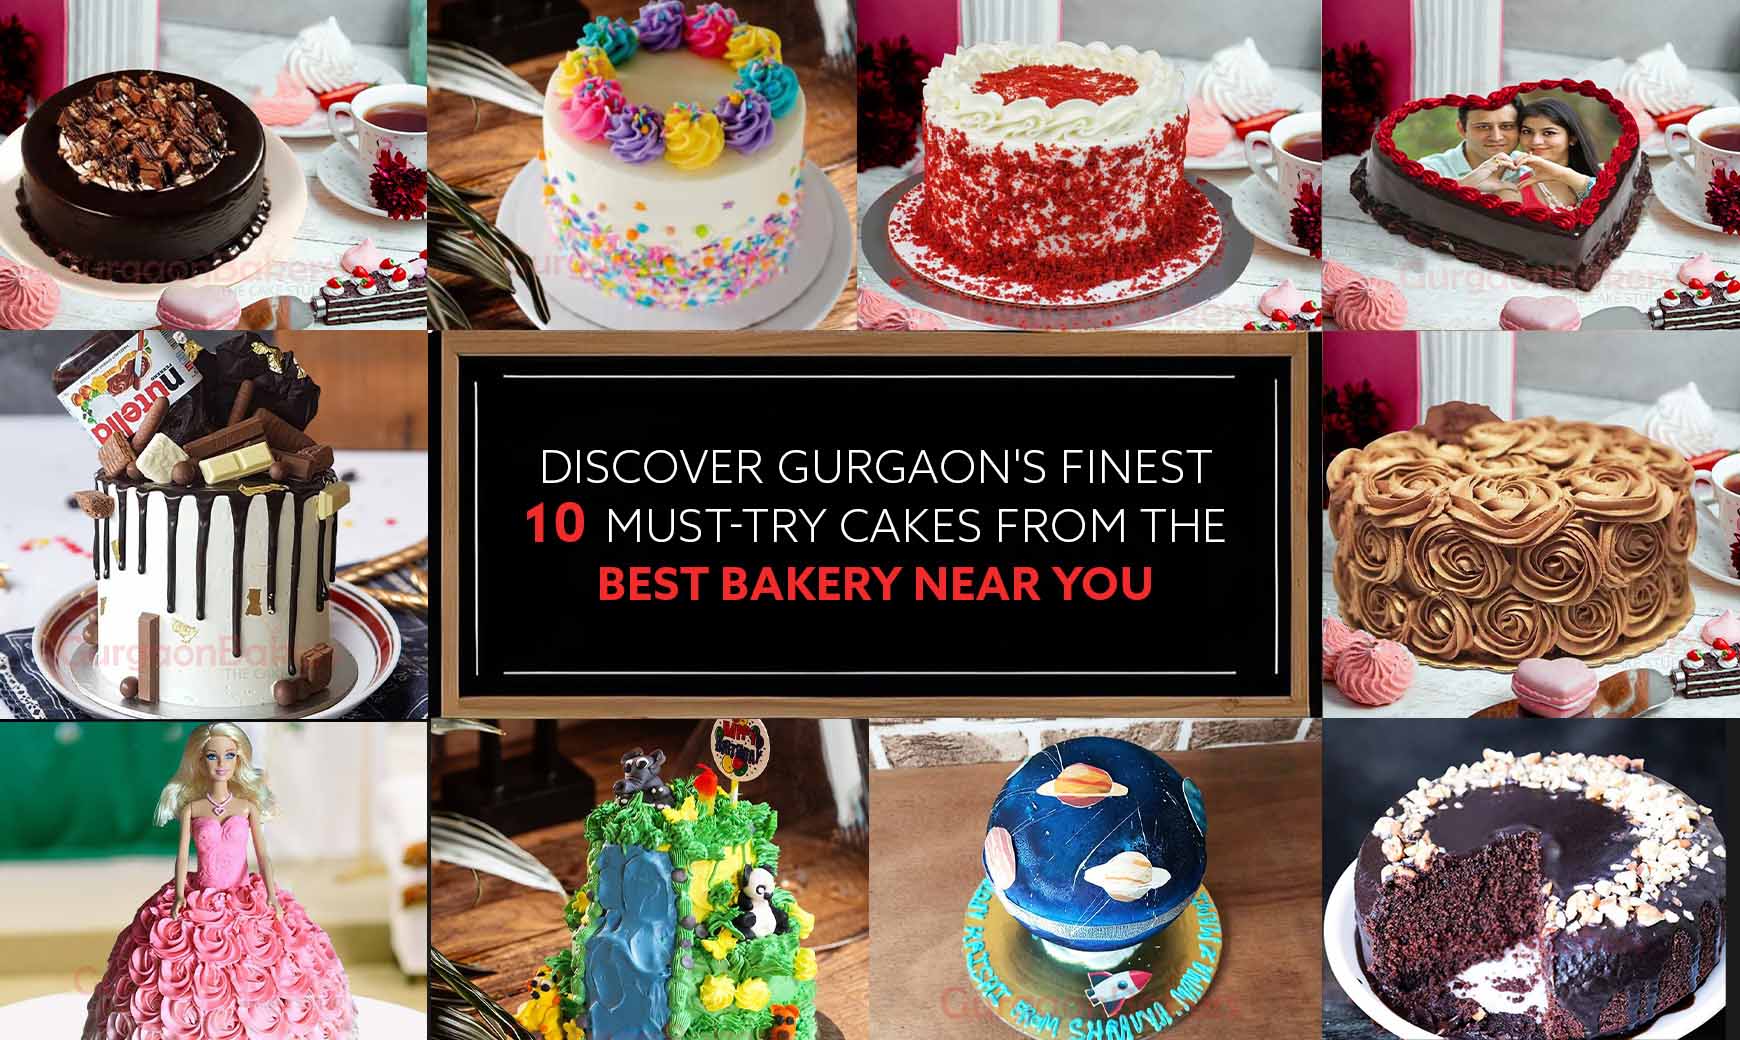 Collage of Gurgaon's top 10 must-try cakes, featuring chocolate, red velvet, and themed cakes, perfect for any celebration